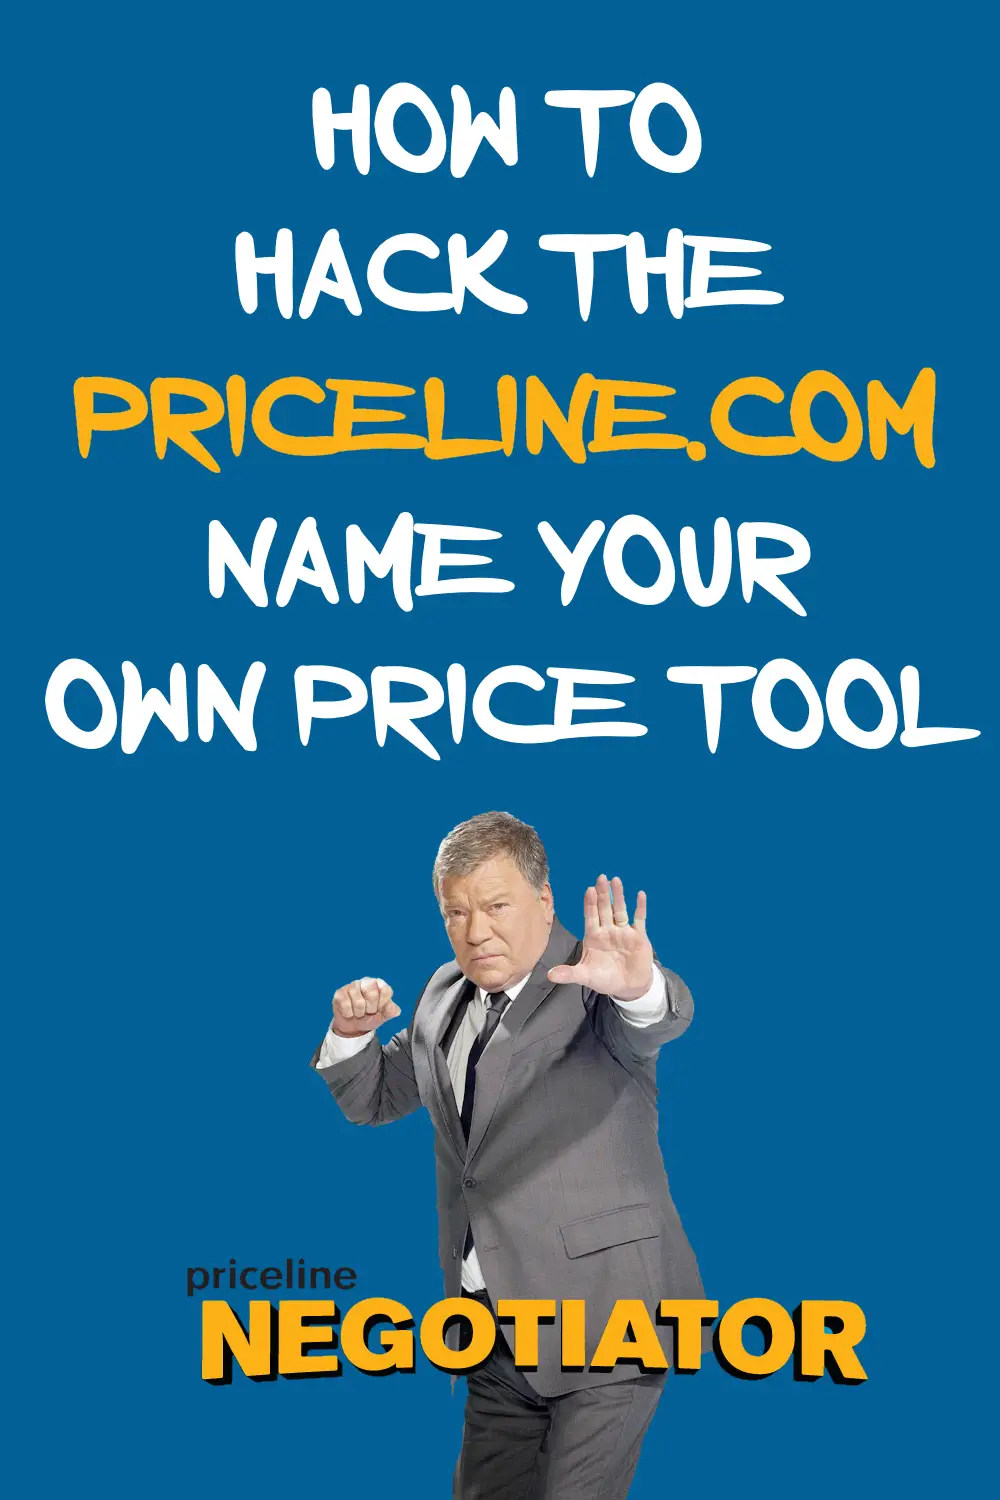 priceline name your own price tool